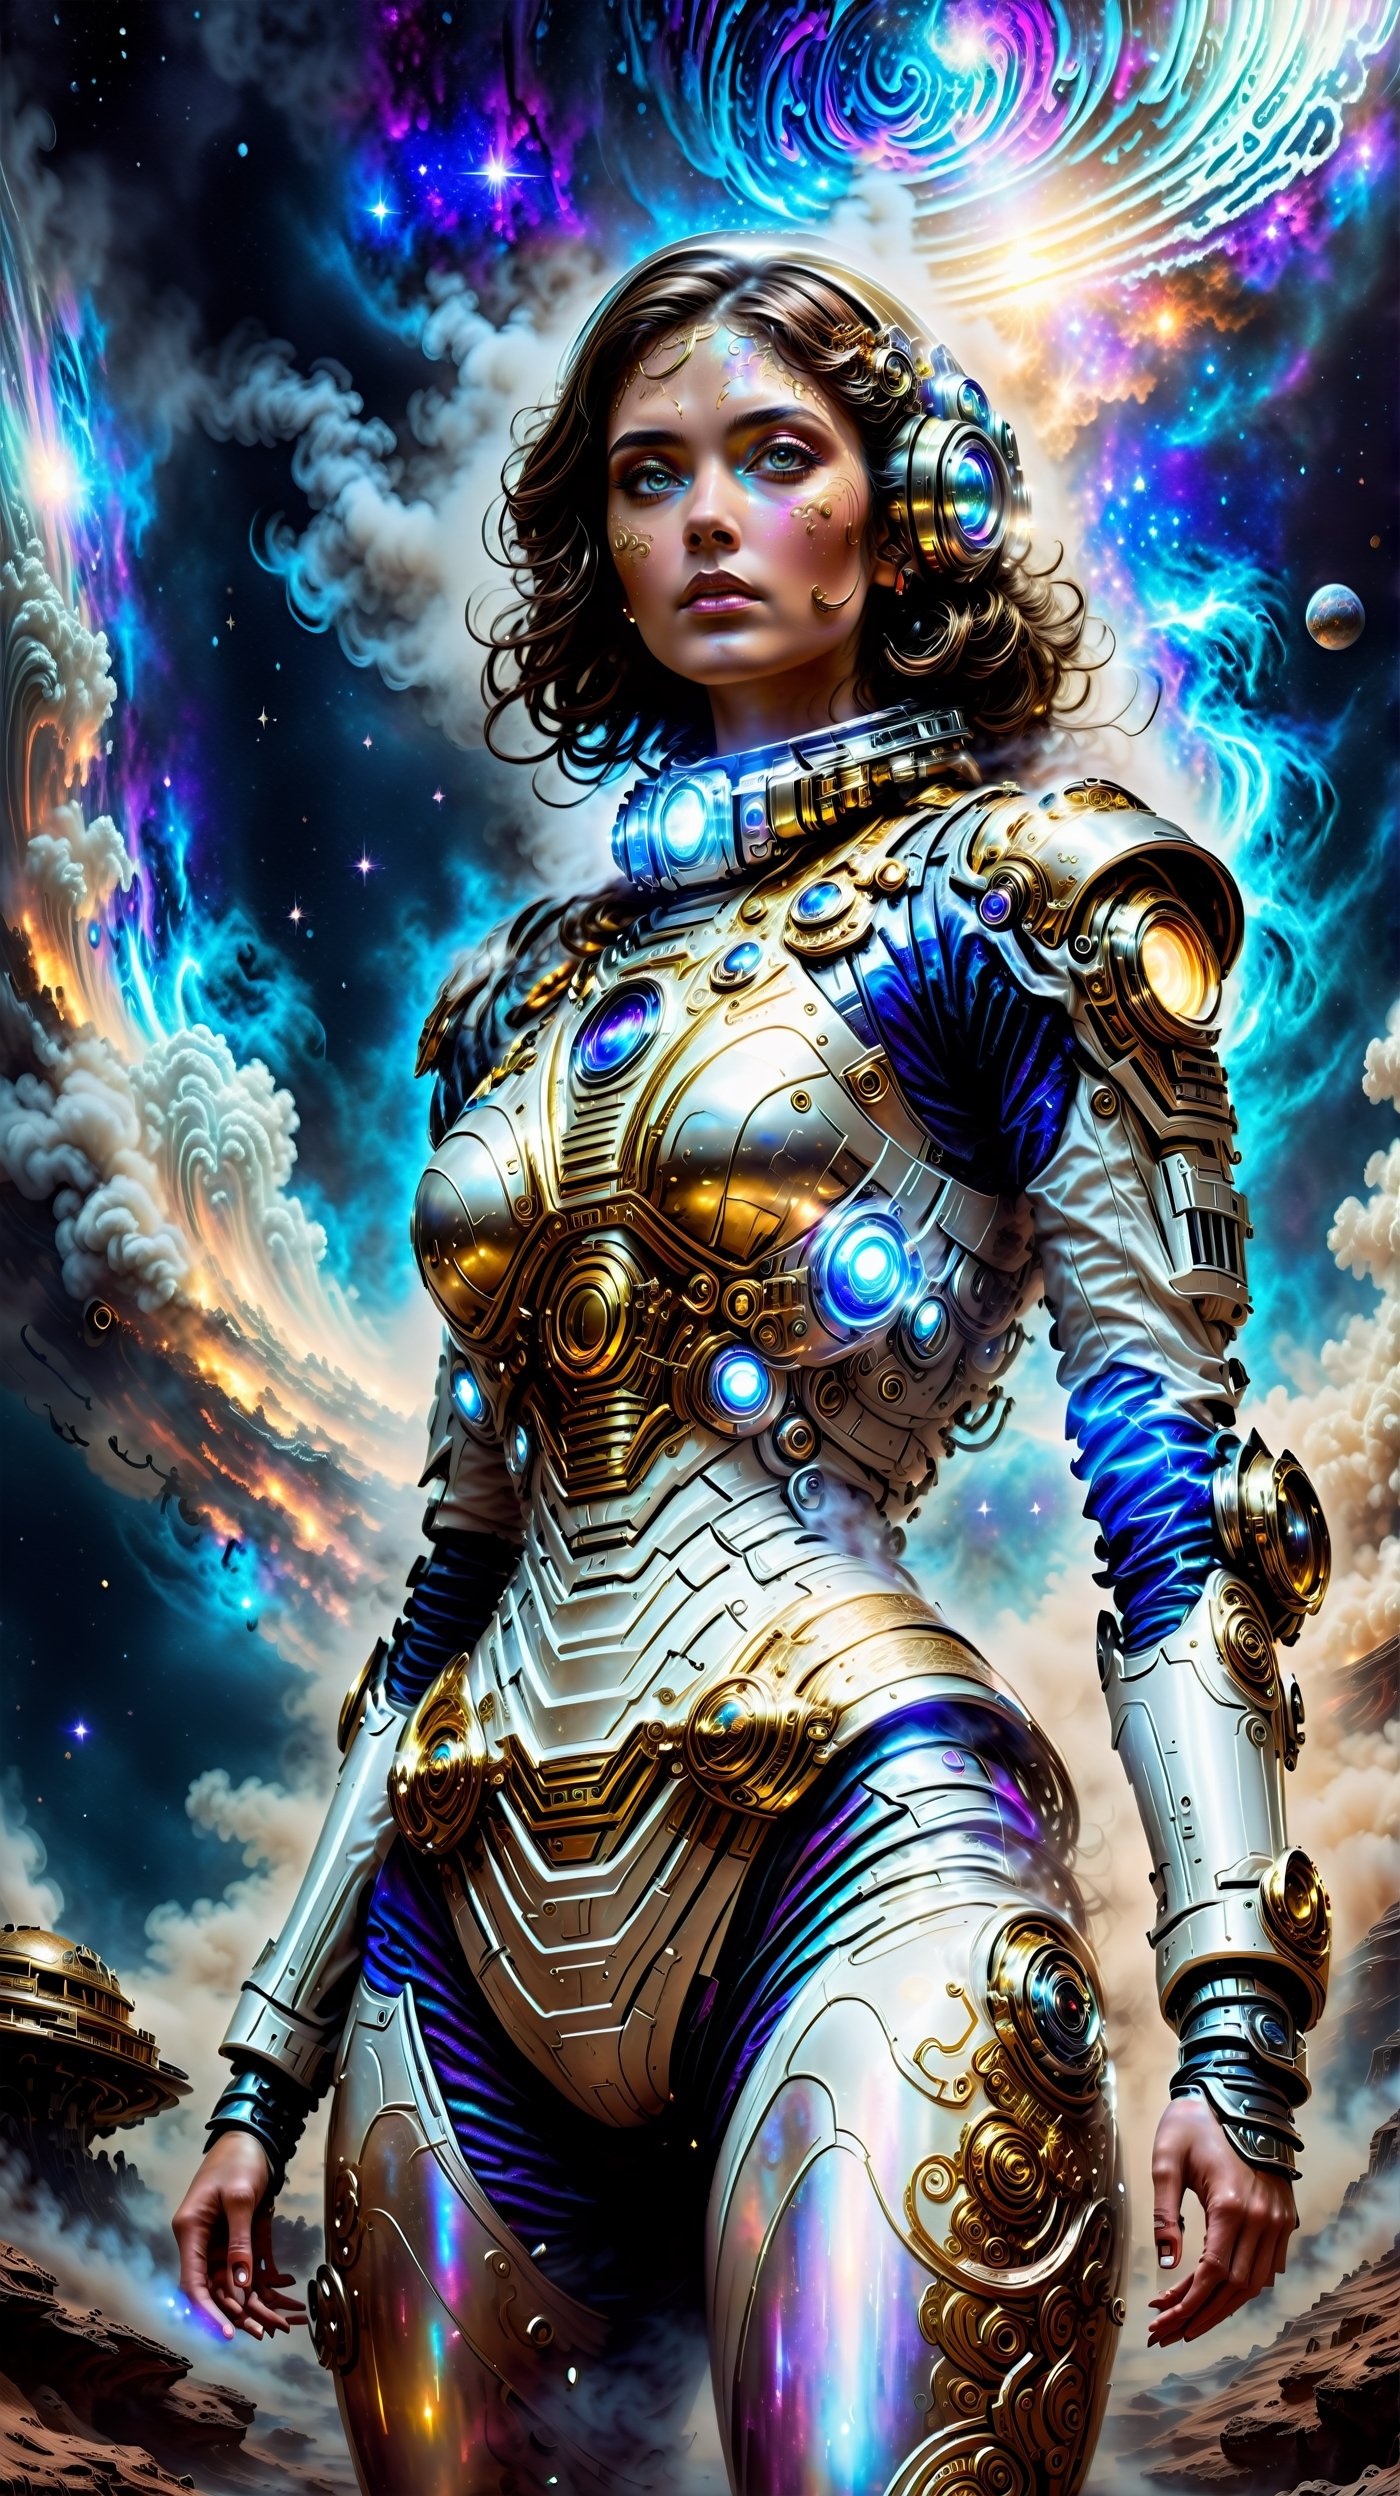 A stunning, 4K masterpiece depicts an astronaut clad in ornate, steam-powered armor, standing at the edge of a distant planet's atmosphere. The steam punk-inspired suit is adorned with intricate details, contrasting with the ethereal, hauntingly beautiful view of the cosmos. Vivid colors and moody shadows dance across the scene, as starlight fog swirls around her majestic face. A retro-futuristic technology-laden environment, filled with smoke and fog effects, creates a timeless sense of adventure and mystery. The isolated heroine's pose exudes an air of exalted exploration, set against the dramatic contrast of distant planets.